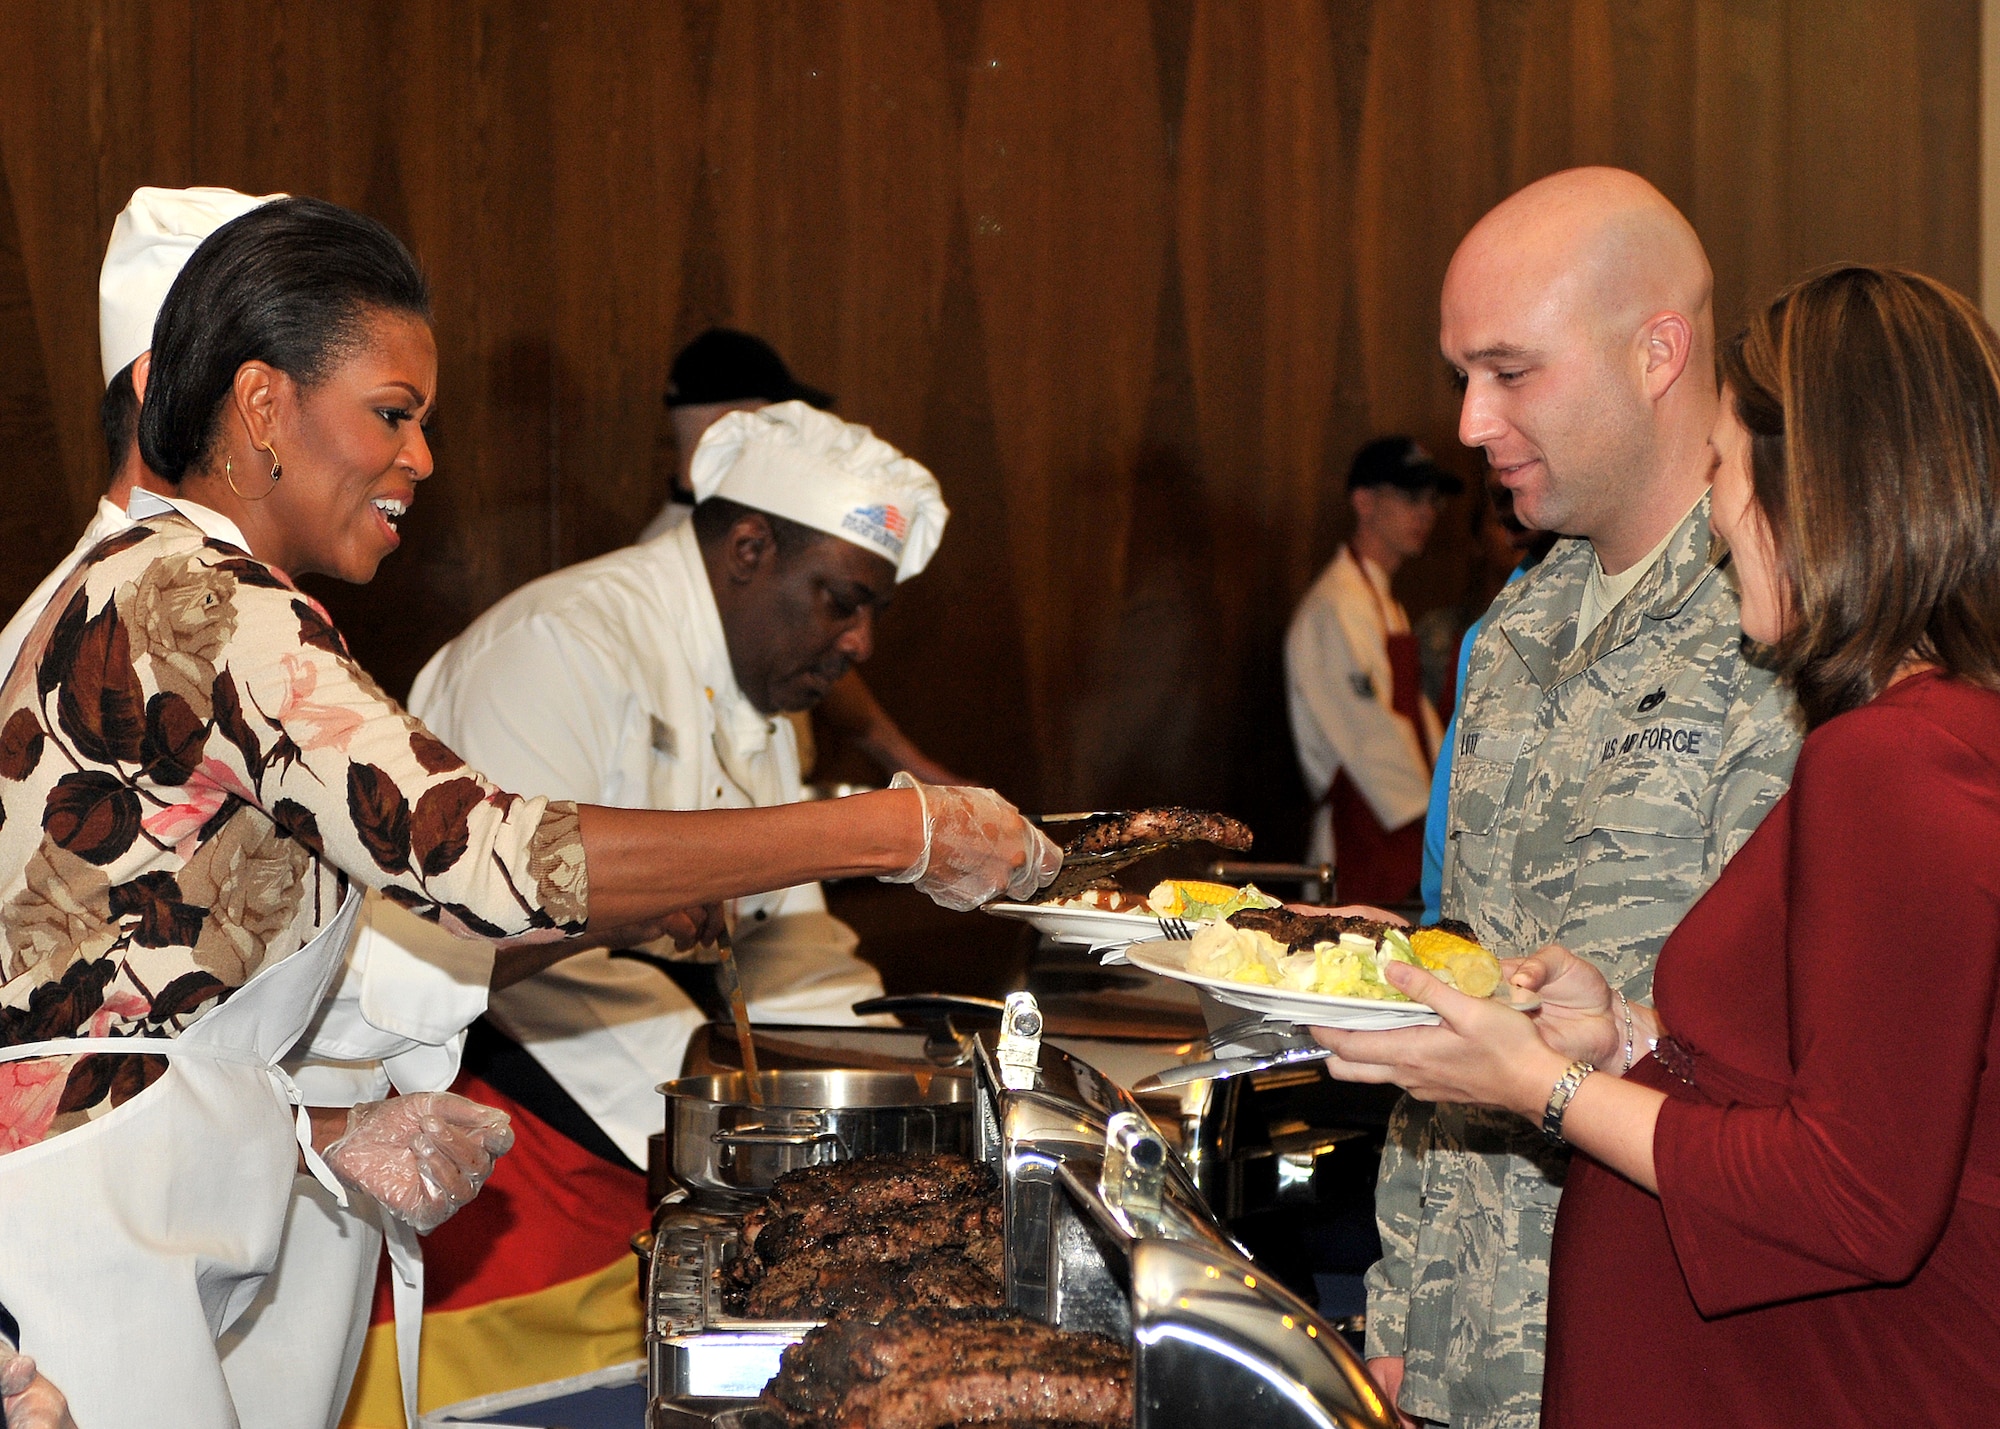 U.S. First Lady Michelle Obama, serves steaks to servicemembers and their families during a surprise visit to the Ramstein Officers Club Nov 11. Mrs. Obama met with wounded servicemembers at Landstuhl Regional Medical Center, served lunch, talked briefly to the servicemembers and families and met with German first lady Bettina Wulff before flying on to the United States. (U.S. Air Force Photo by Tech Sgt. Markus M. Maier)
